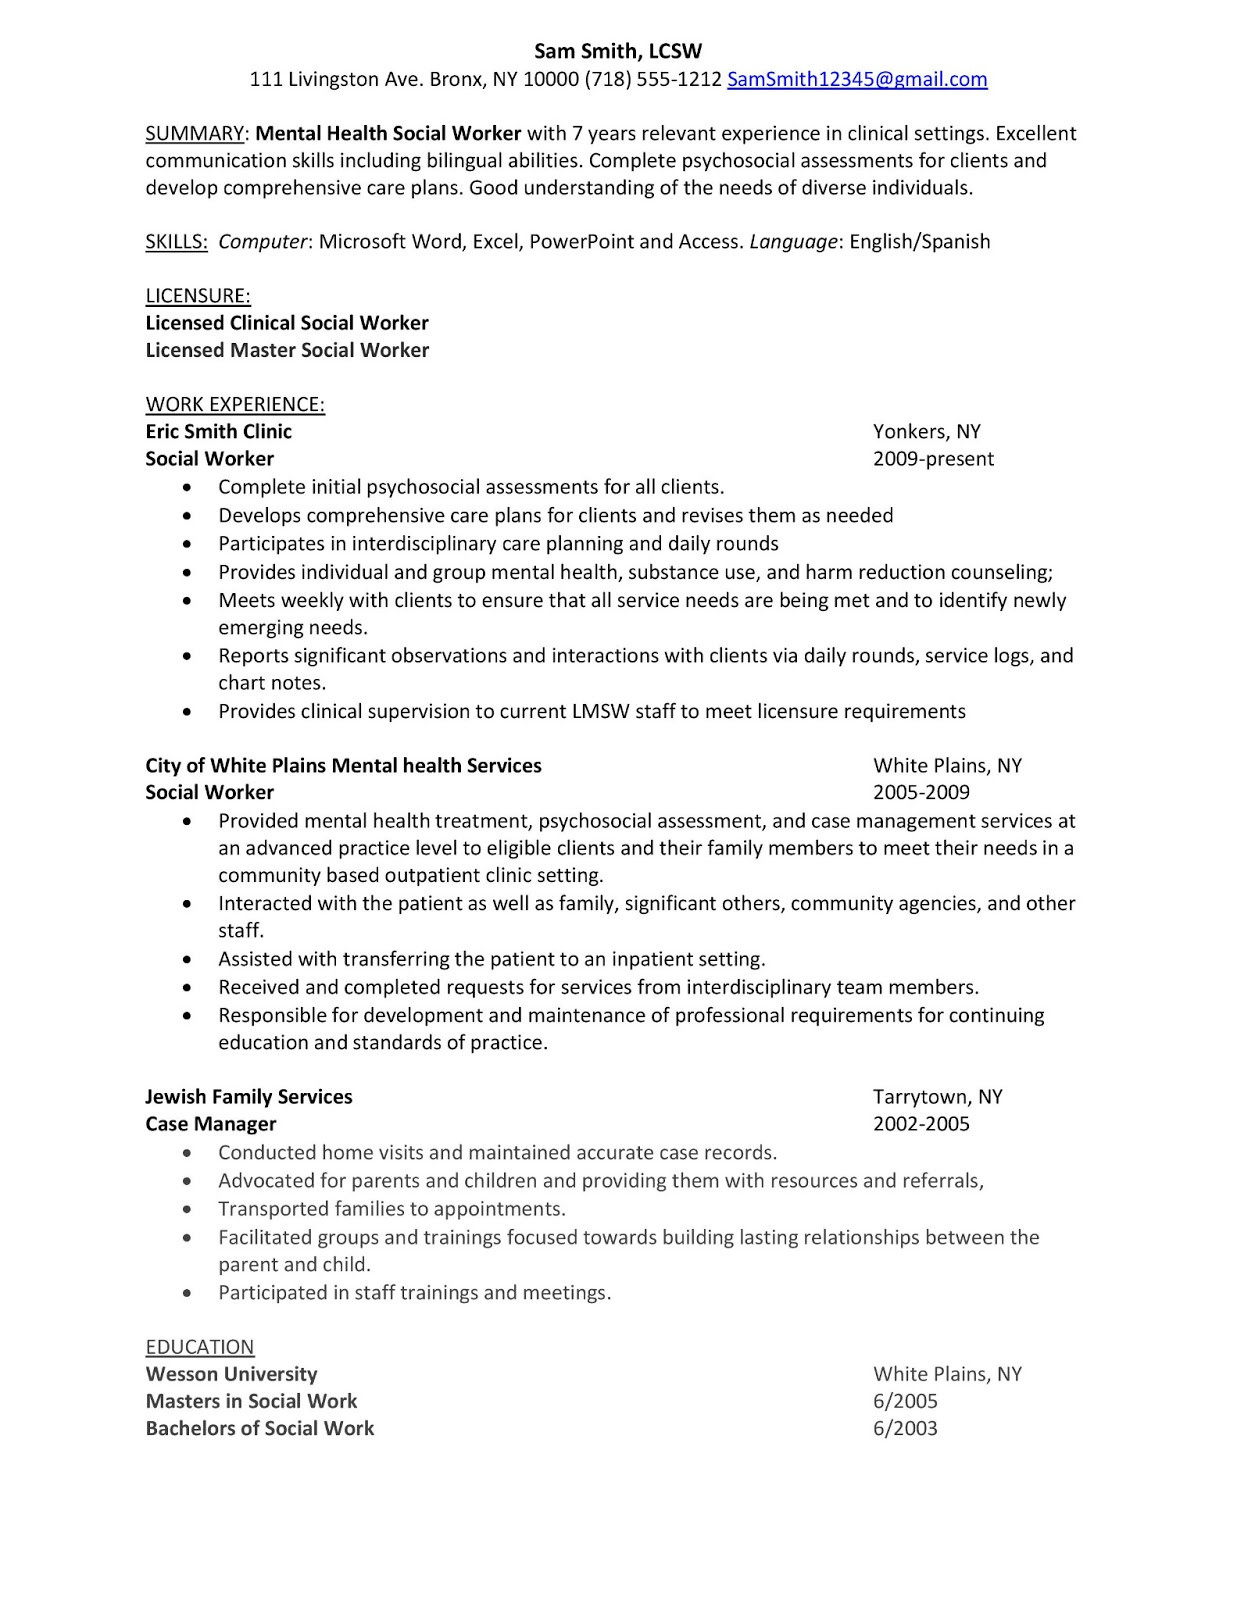 Sample Resume for Qualified Mental Health Professional Sample Resume: Mental Health social Worker Career Advice & Pro …